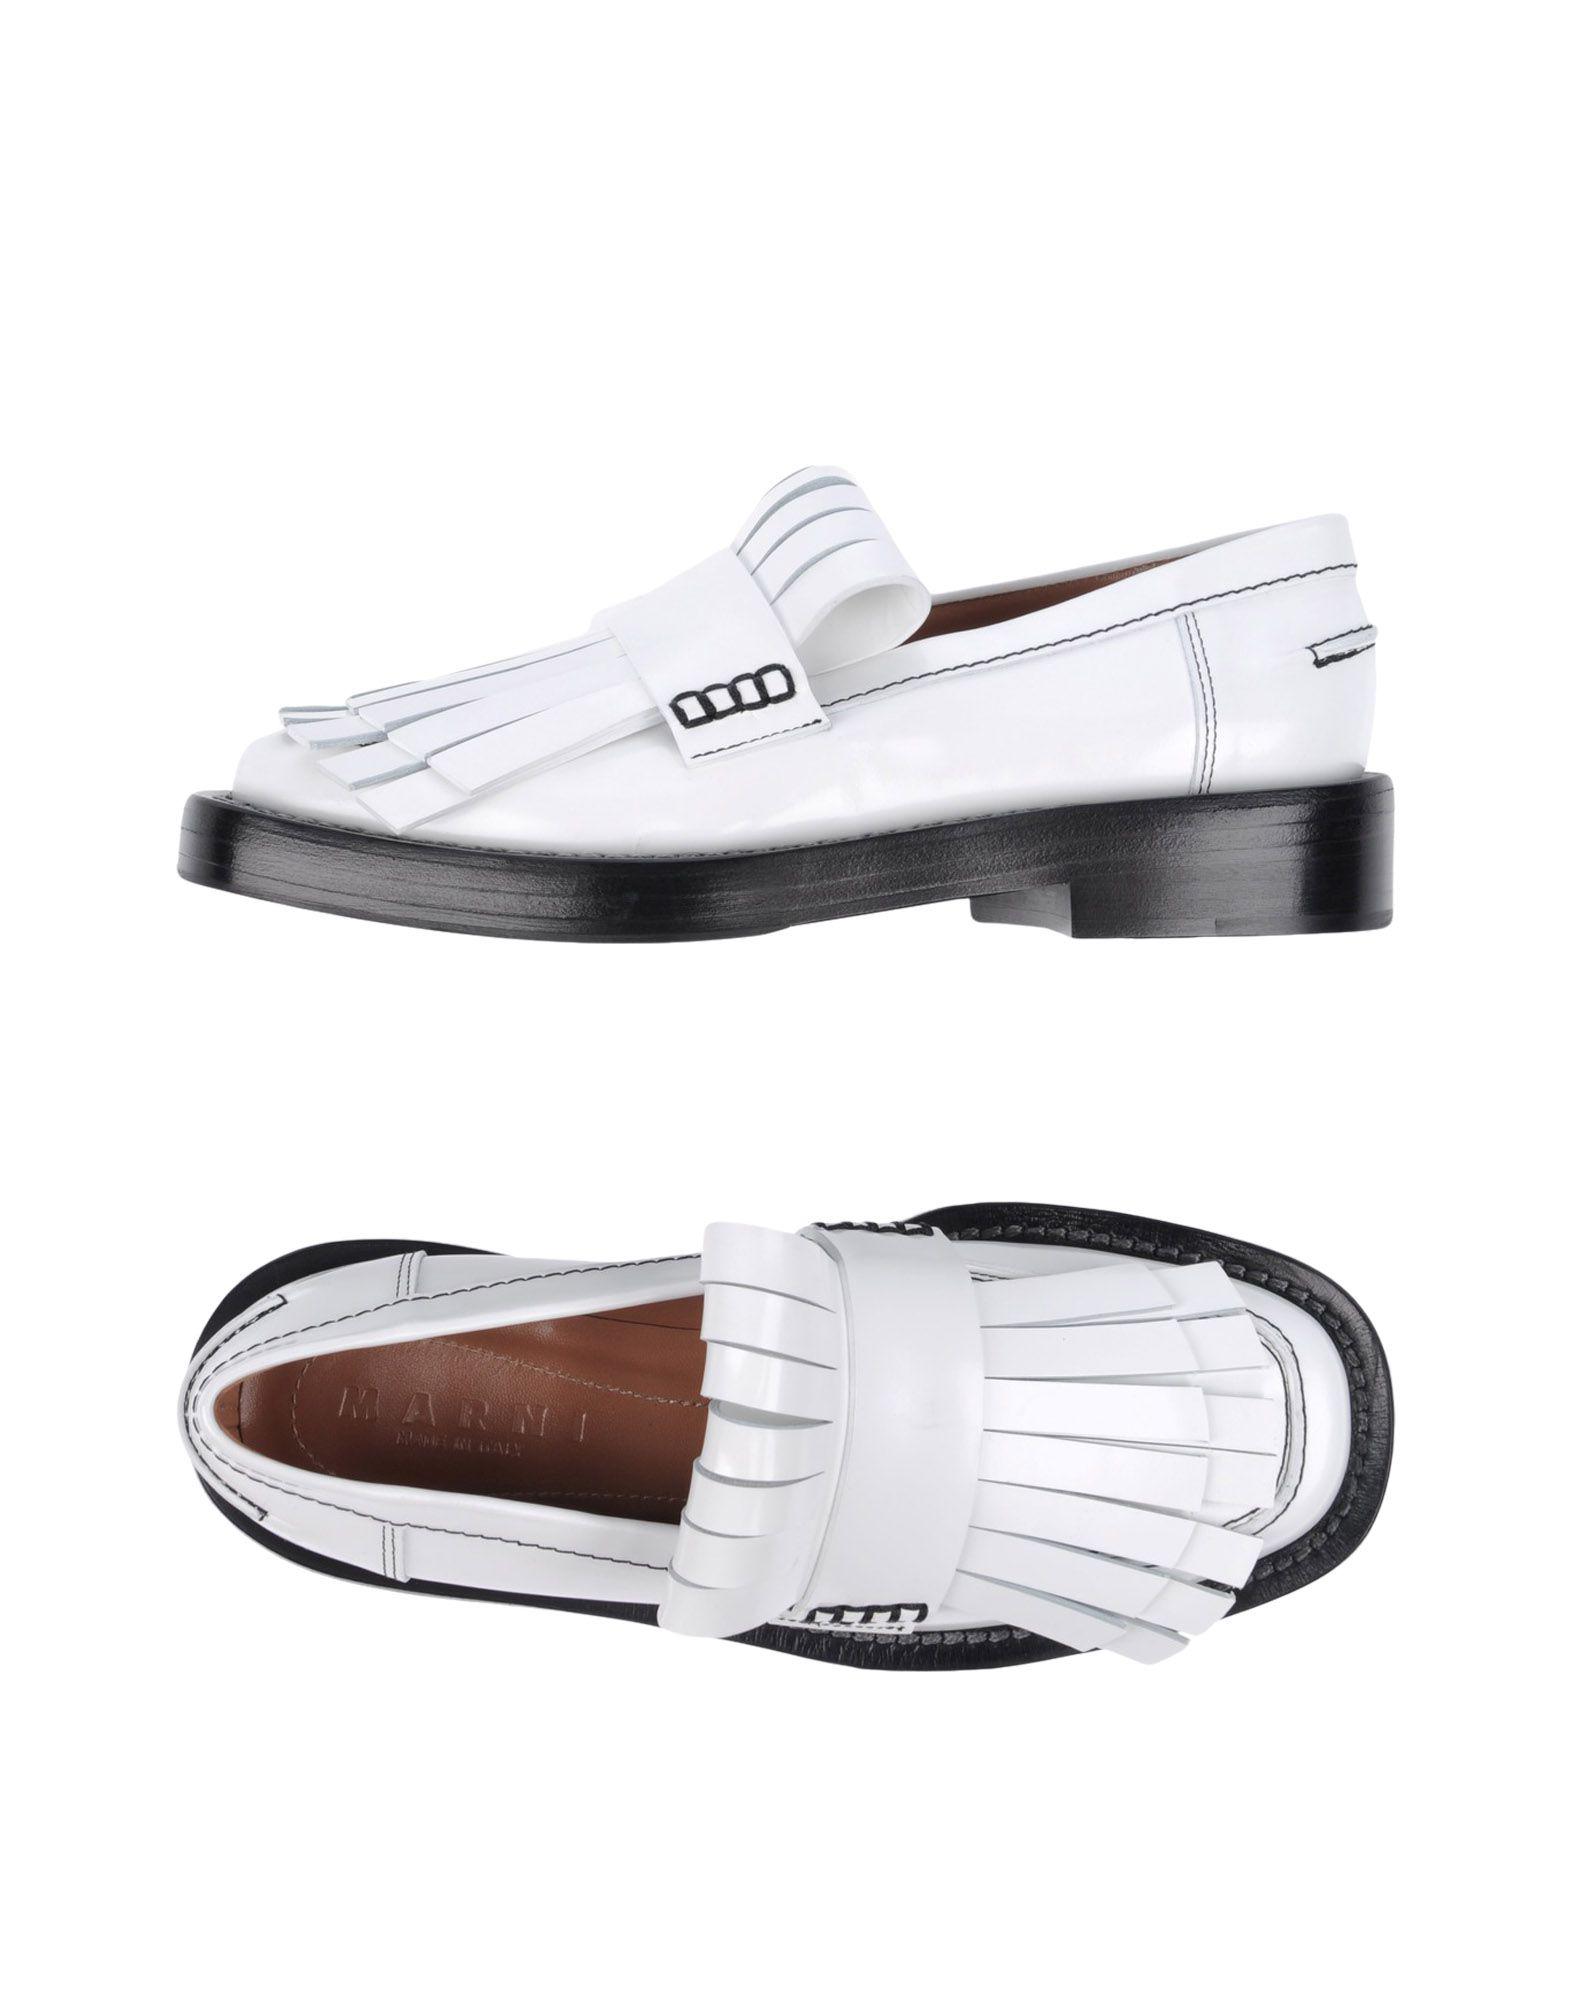 Marni Leather Loafer in White - Lyst